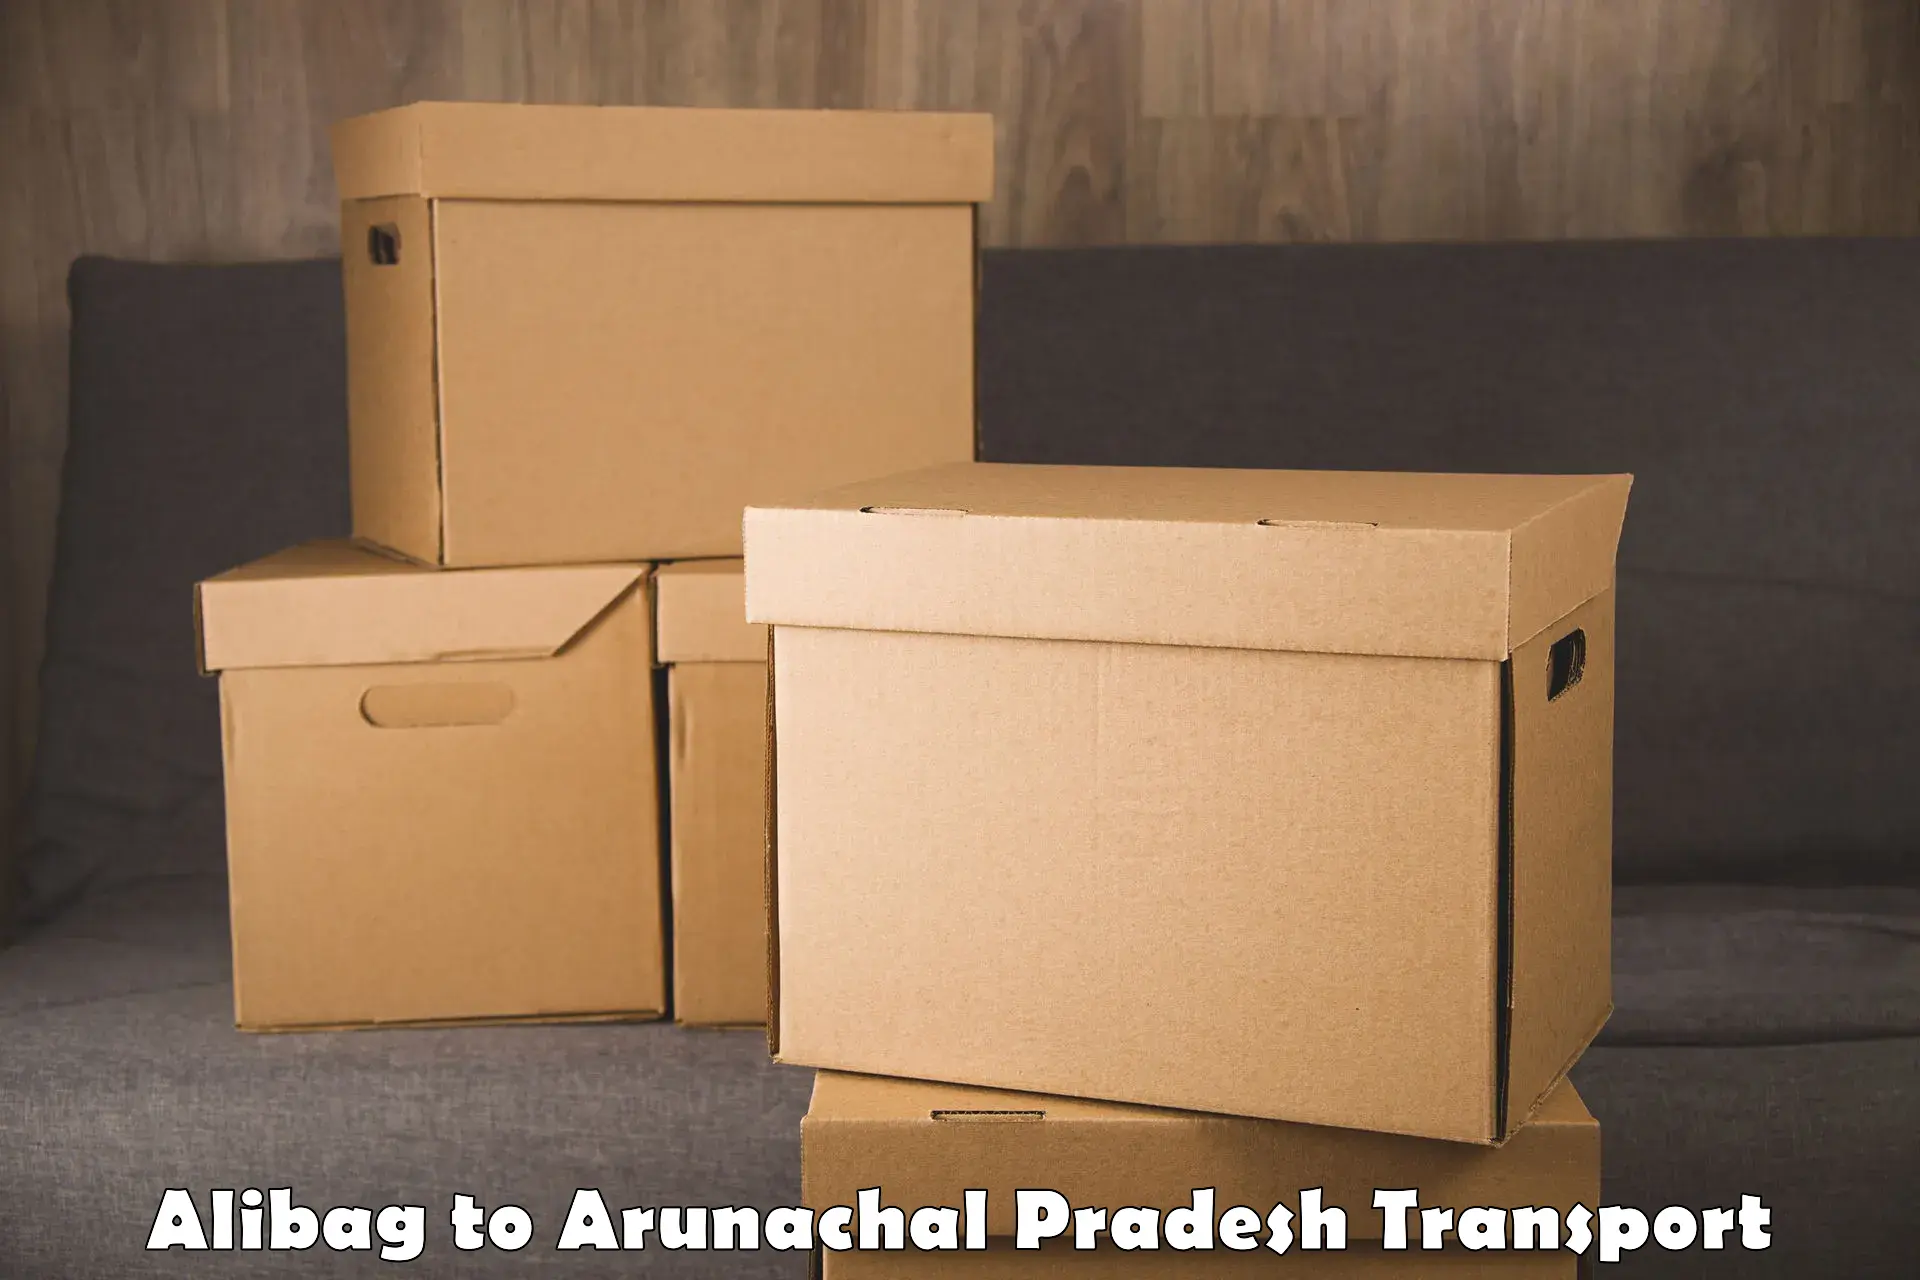 Air freight transport services in Alibag to Pasighat